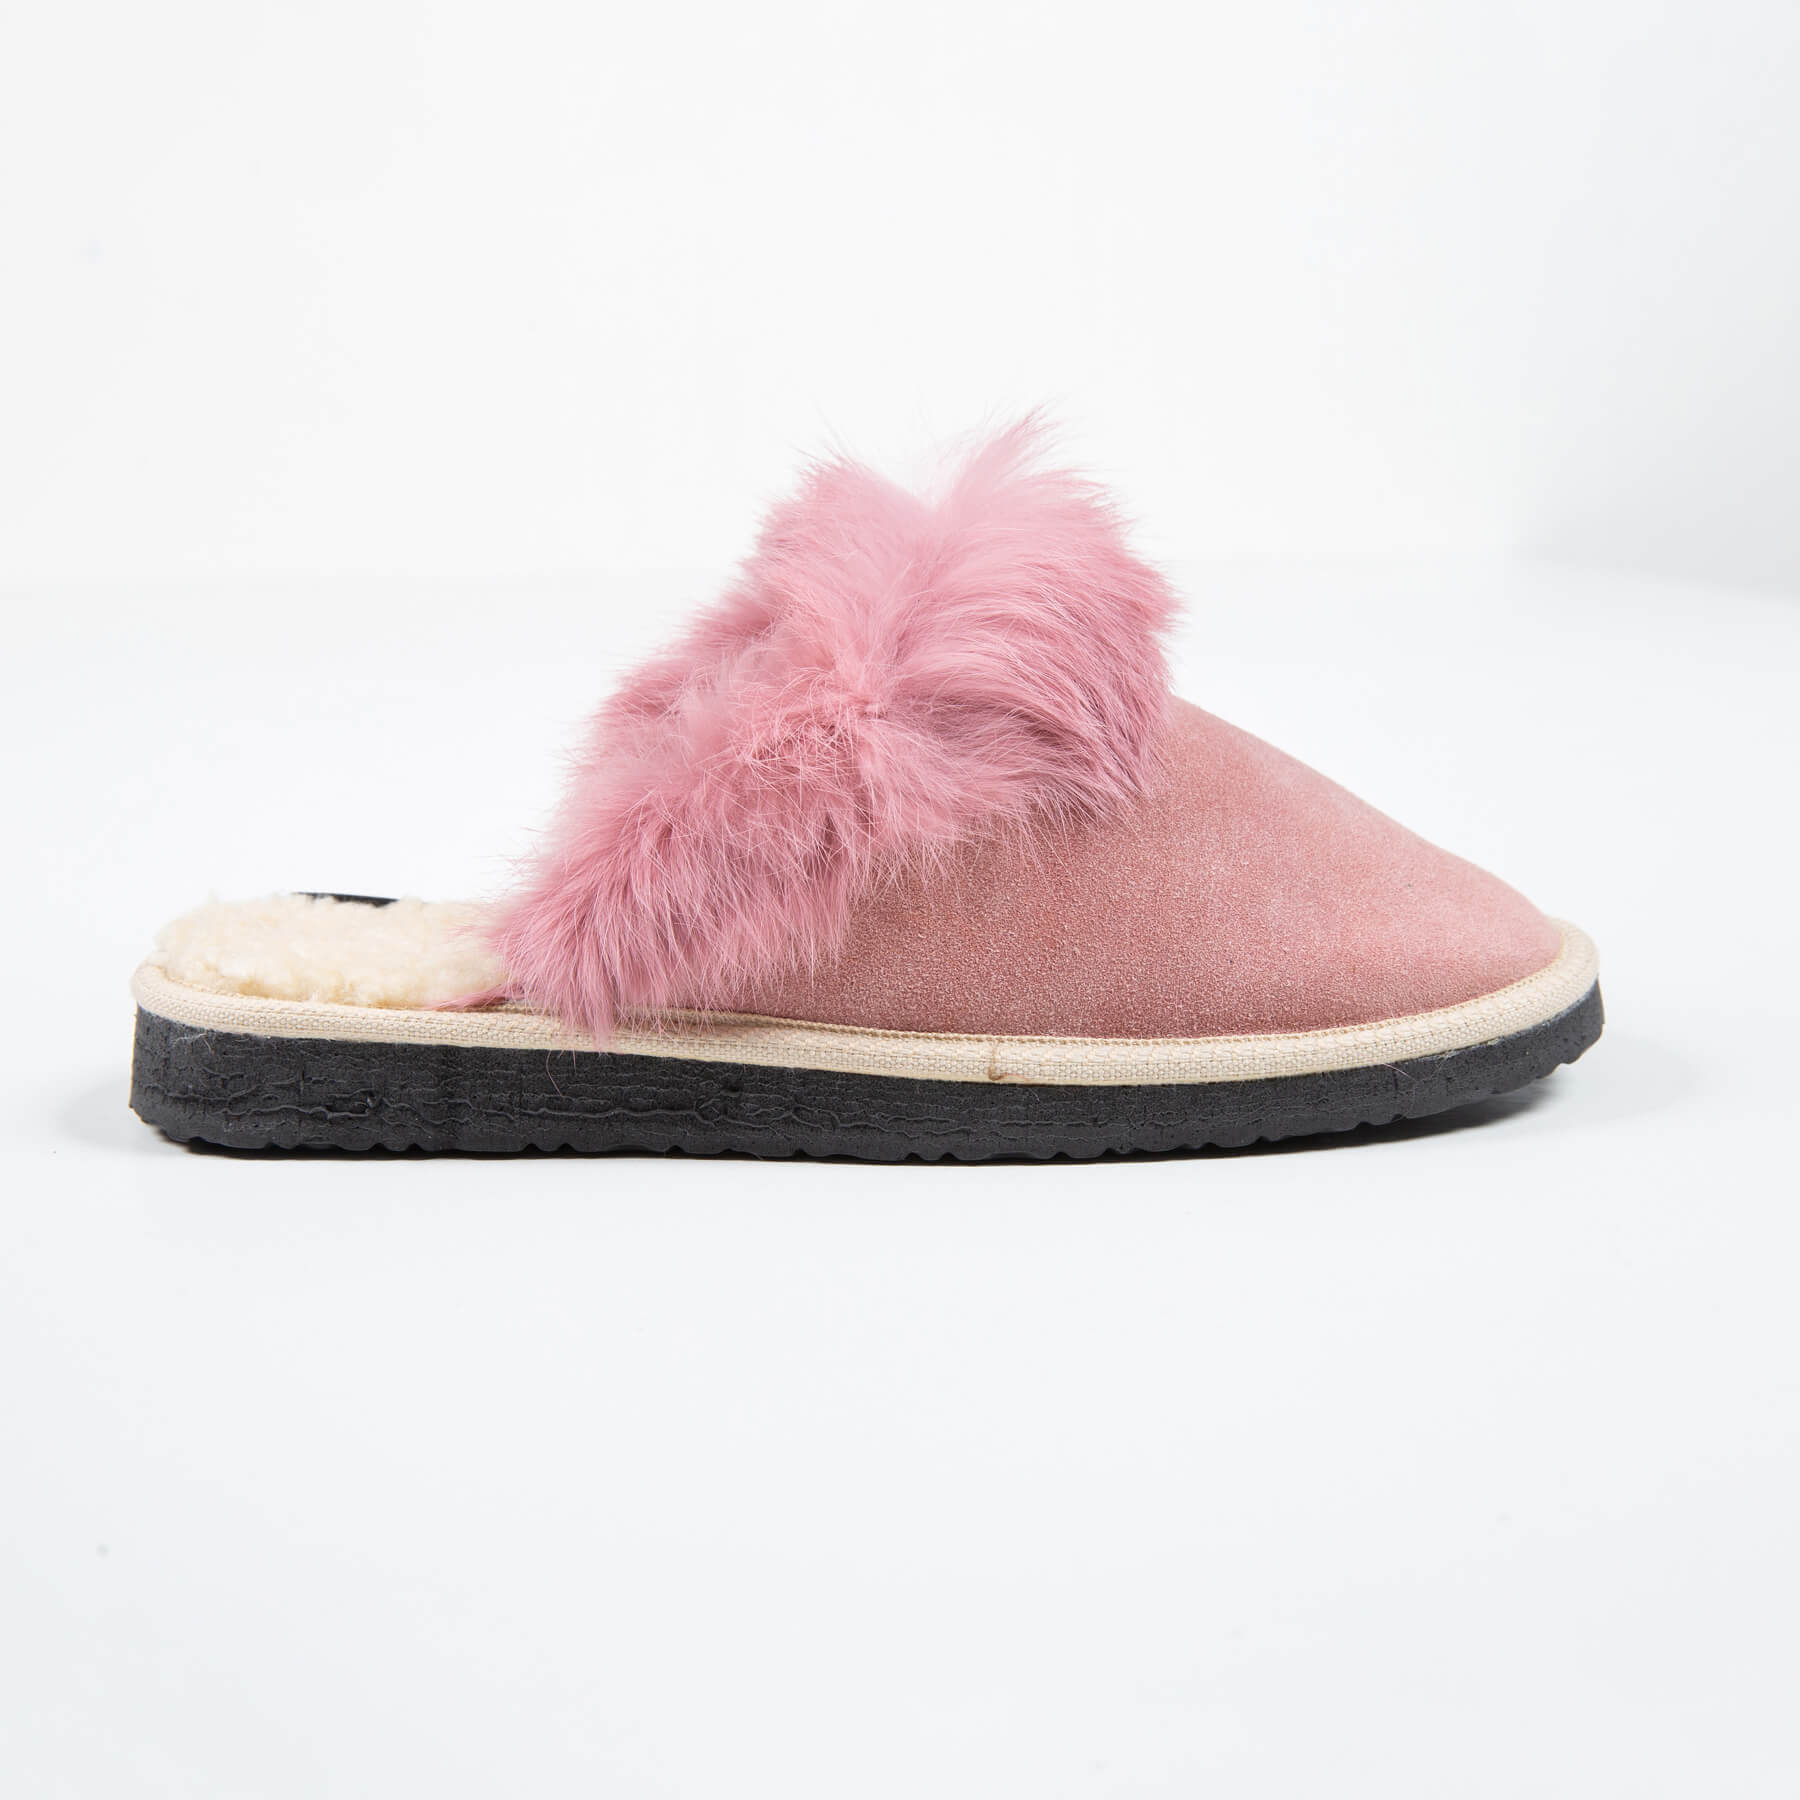 real sheep wool slippers